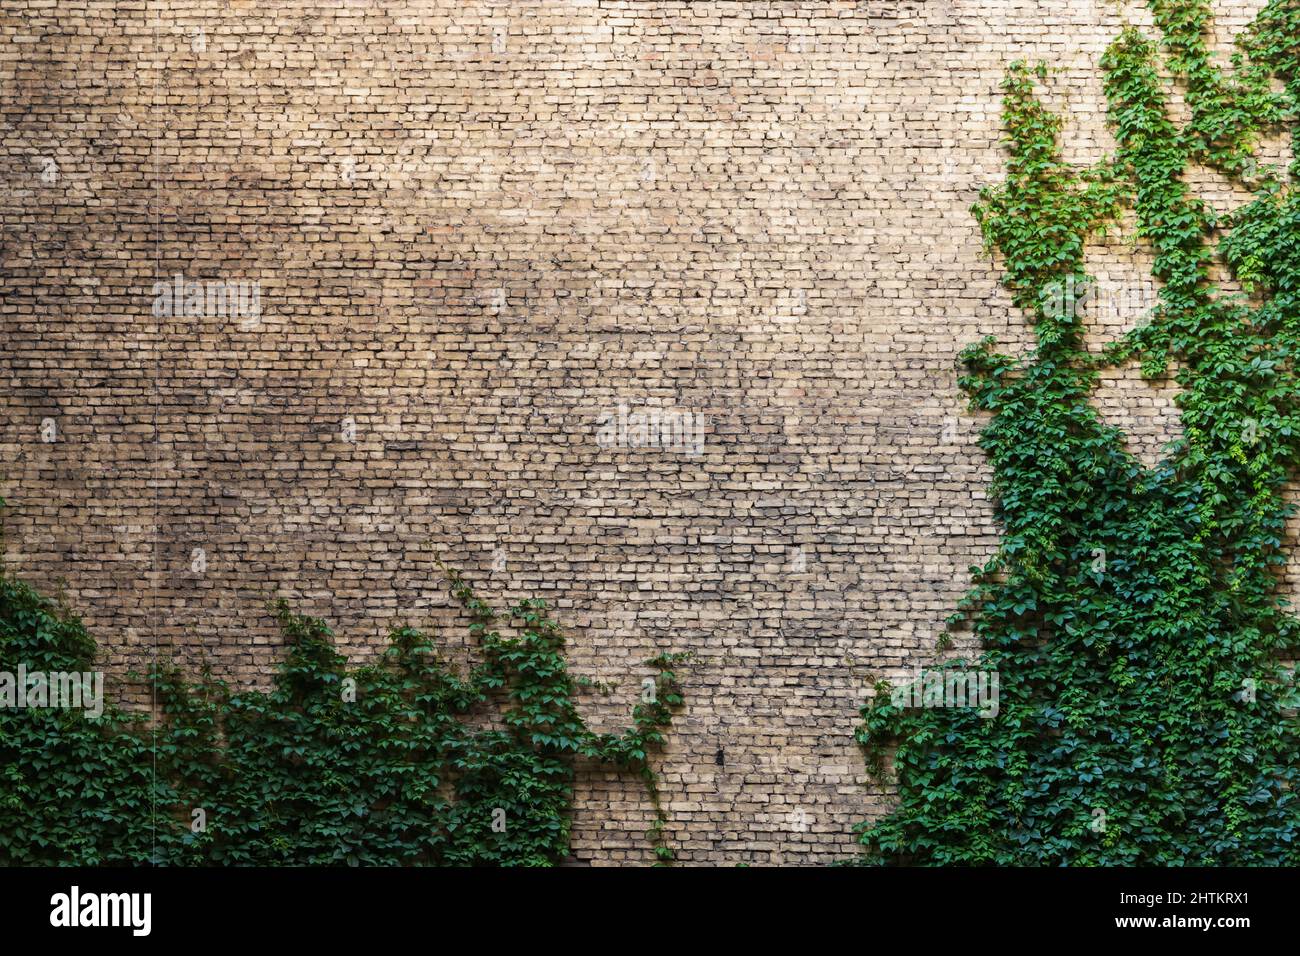 Background texture of old brick wall with green creeping plant on it Stock Photo